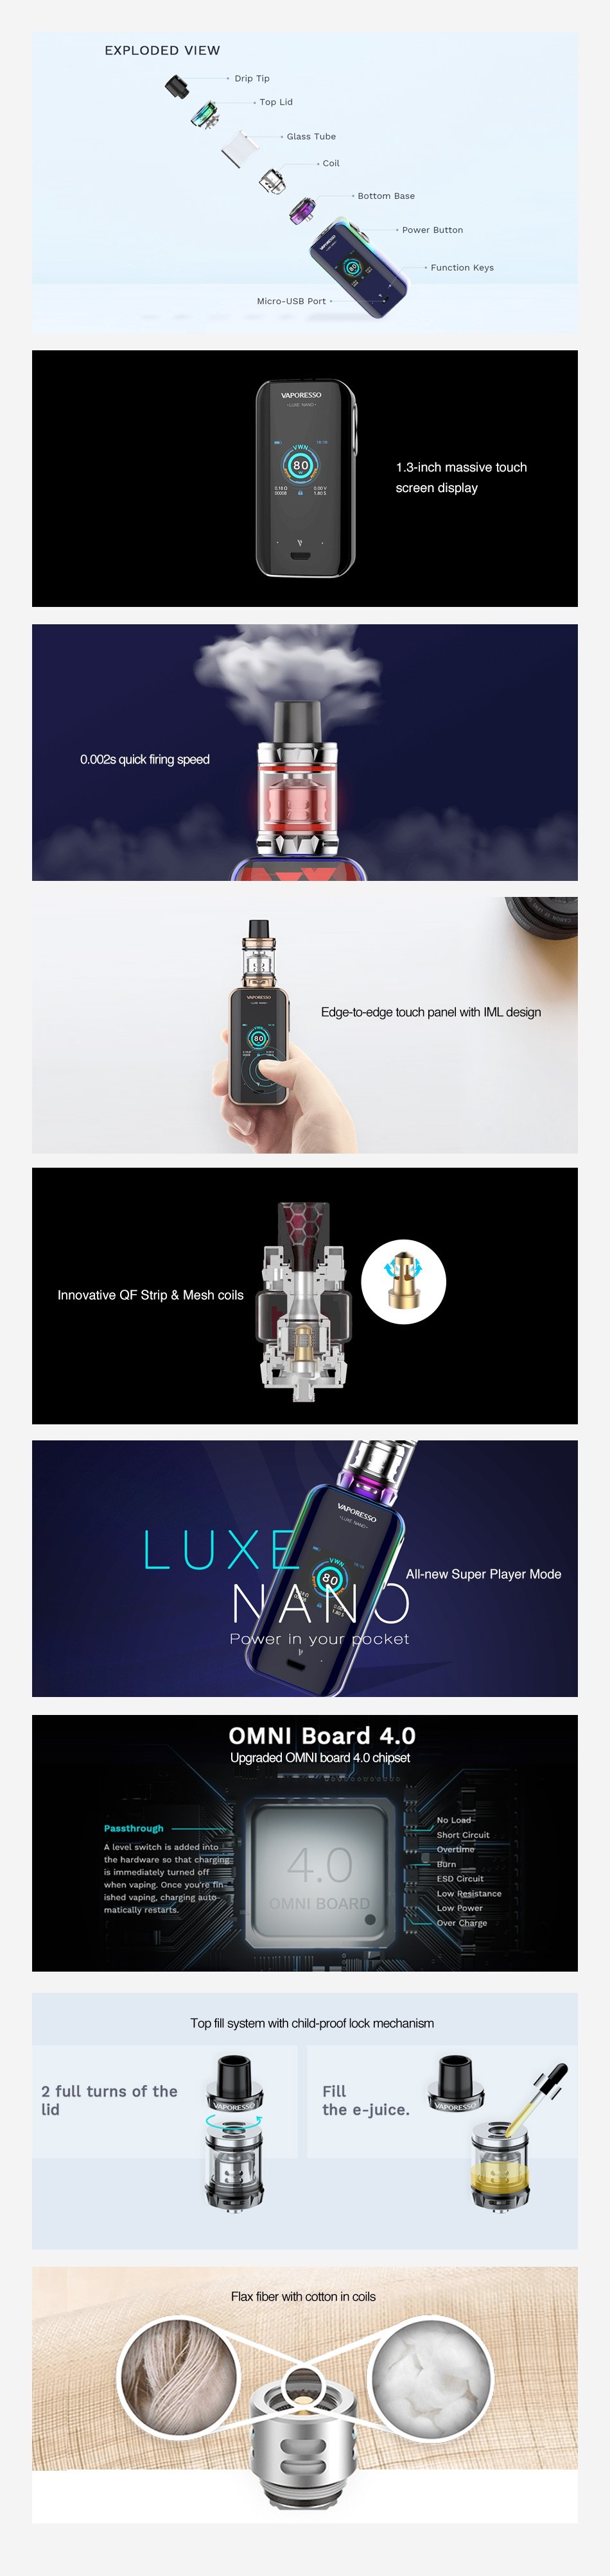 Vaporesso Luxe Nano 80W Touch Screen TC Kit 2500mAh 3 inch massive touch 0  OCs quick firing speed dge torenge touch pane wth Ml design Innovative QF Strip  Mesh coils L X All ne NA OMNI Board 4 0 Upgraded oMNI bcard 4  chi 40 Too fill system wnh chicHnroof lack mechanism 2 full turns of the iLL